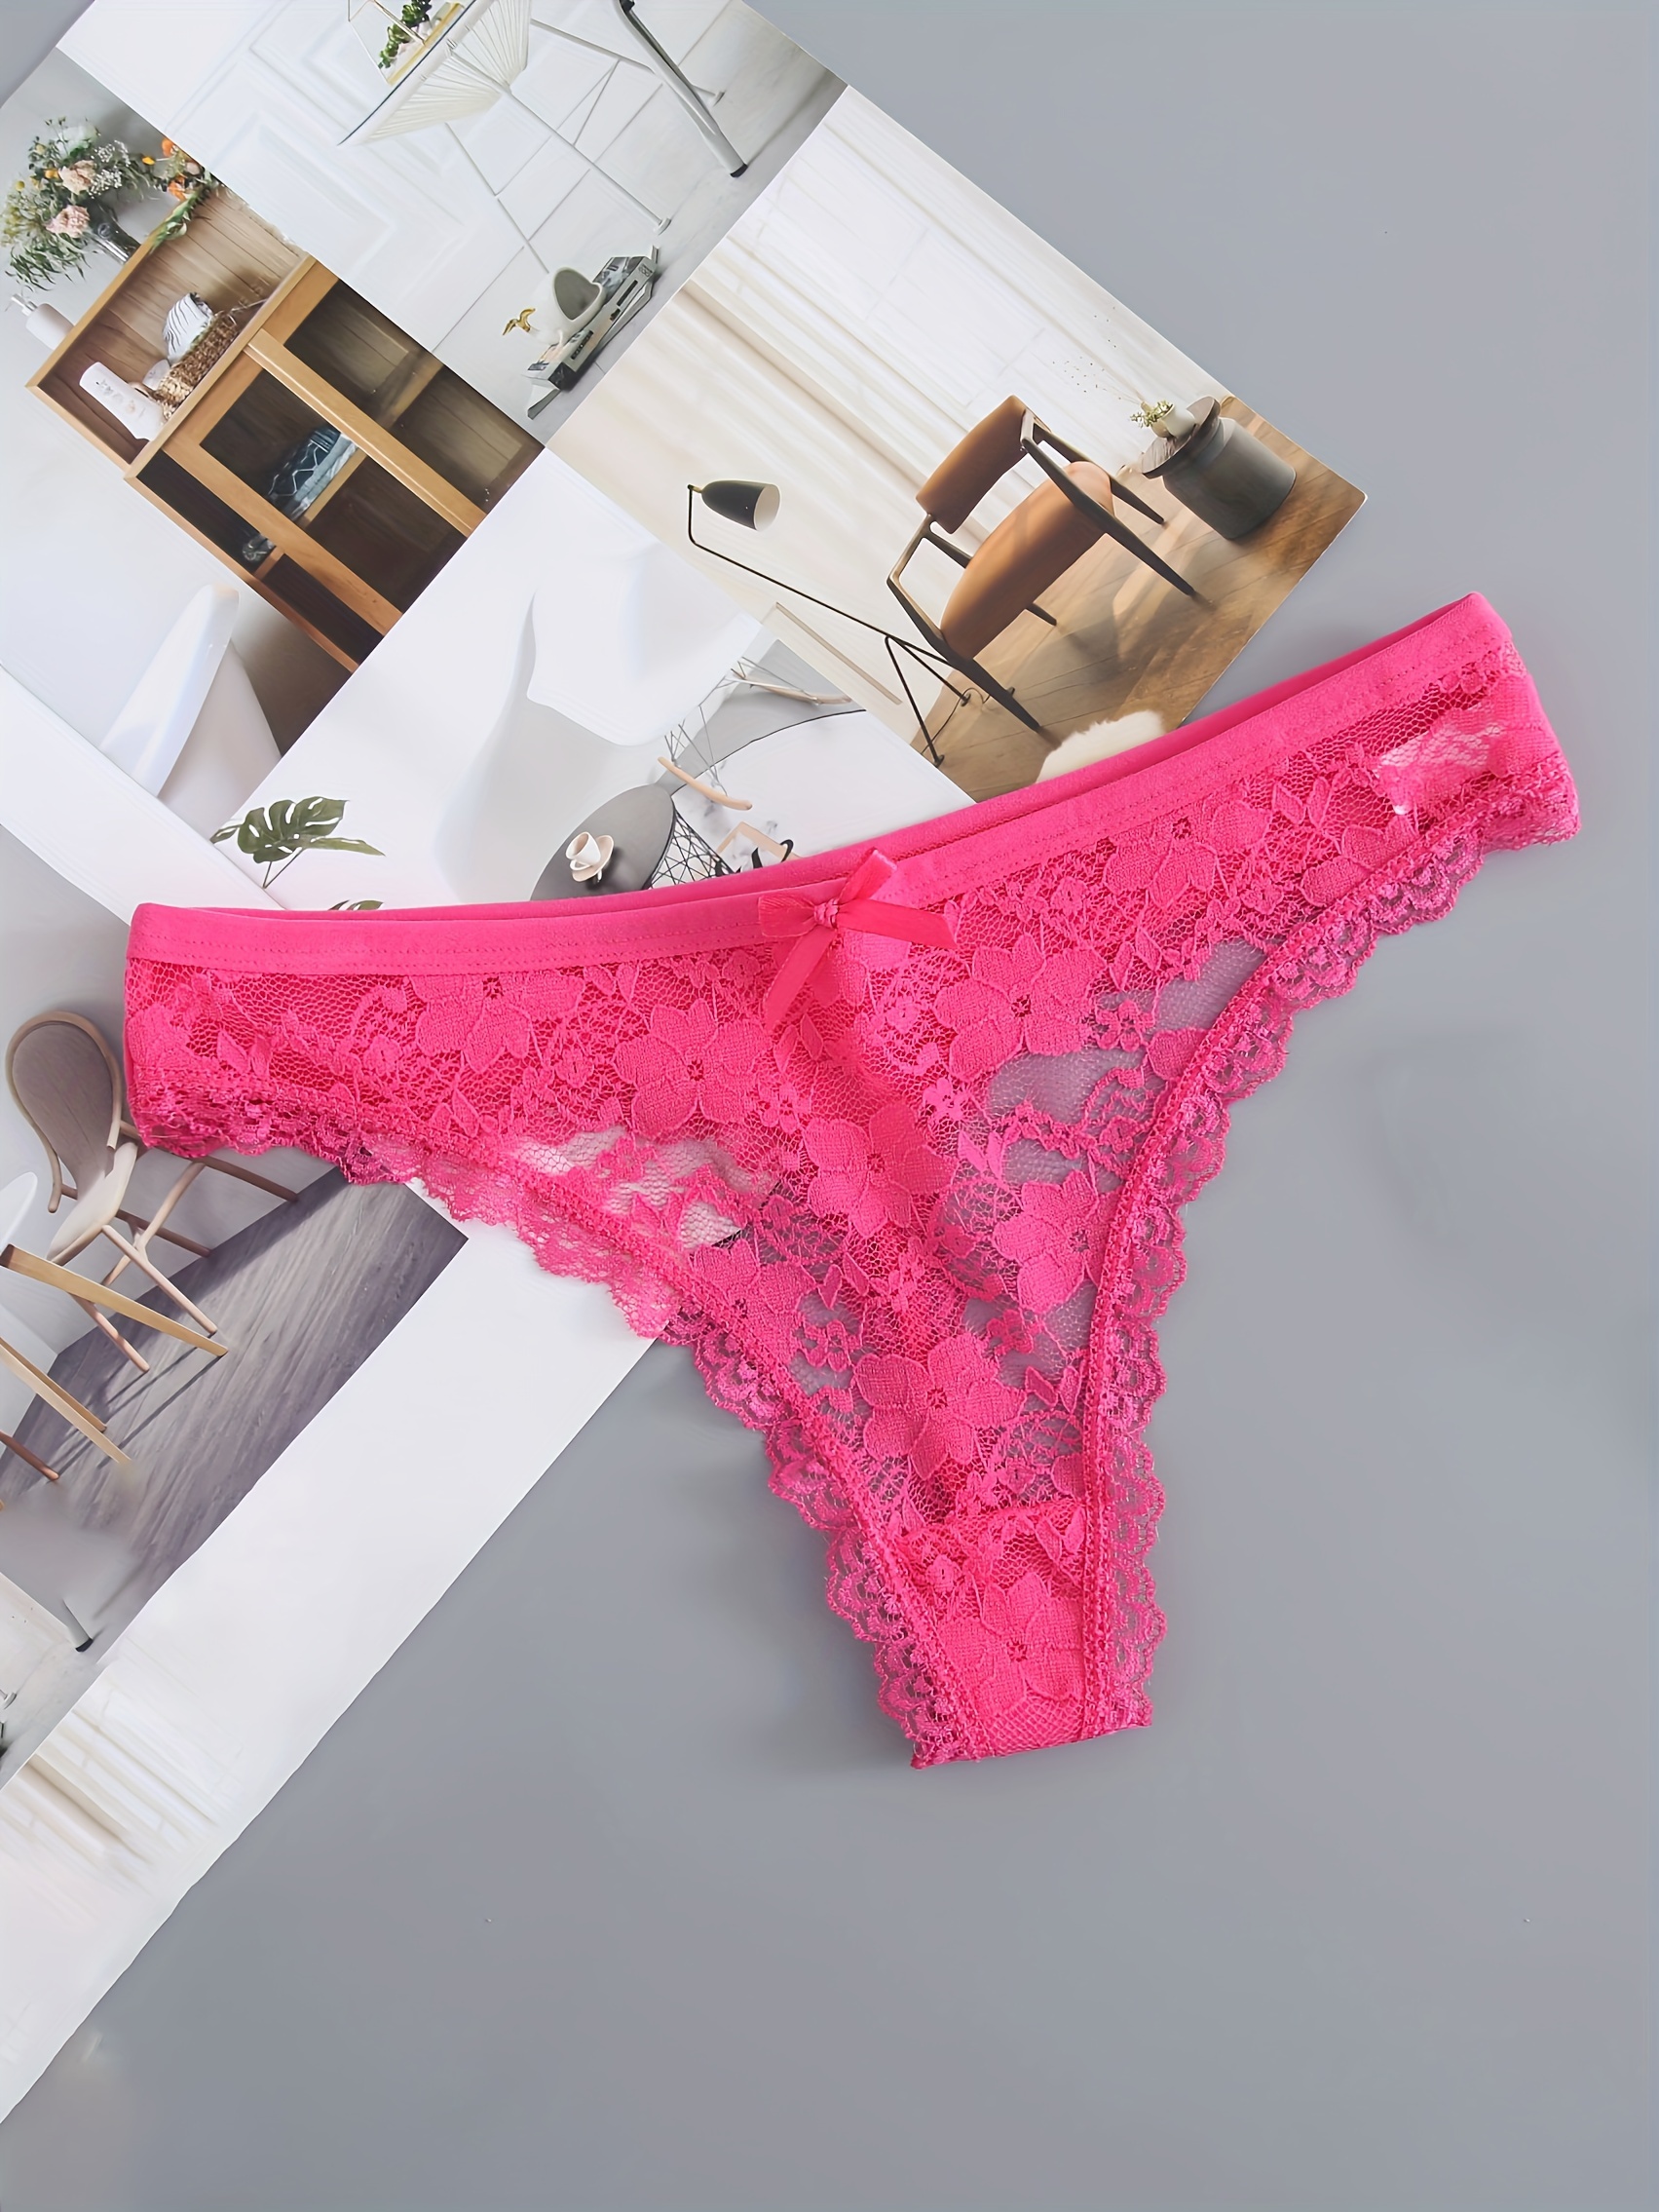 Women's Sexy Panties Lace Thong French Panties Ladies Low-rise Underwear  Knicker